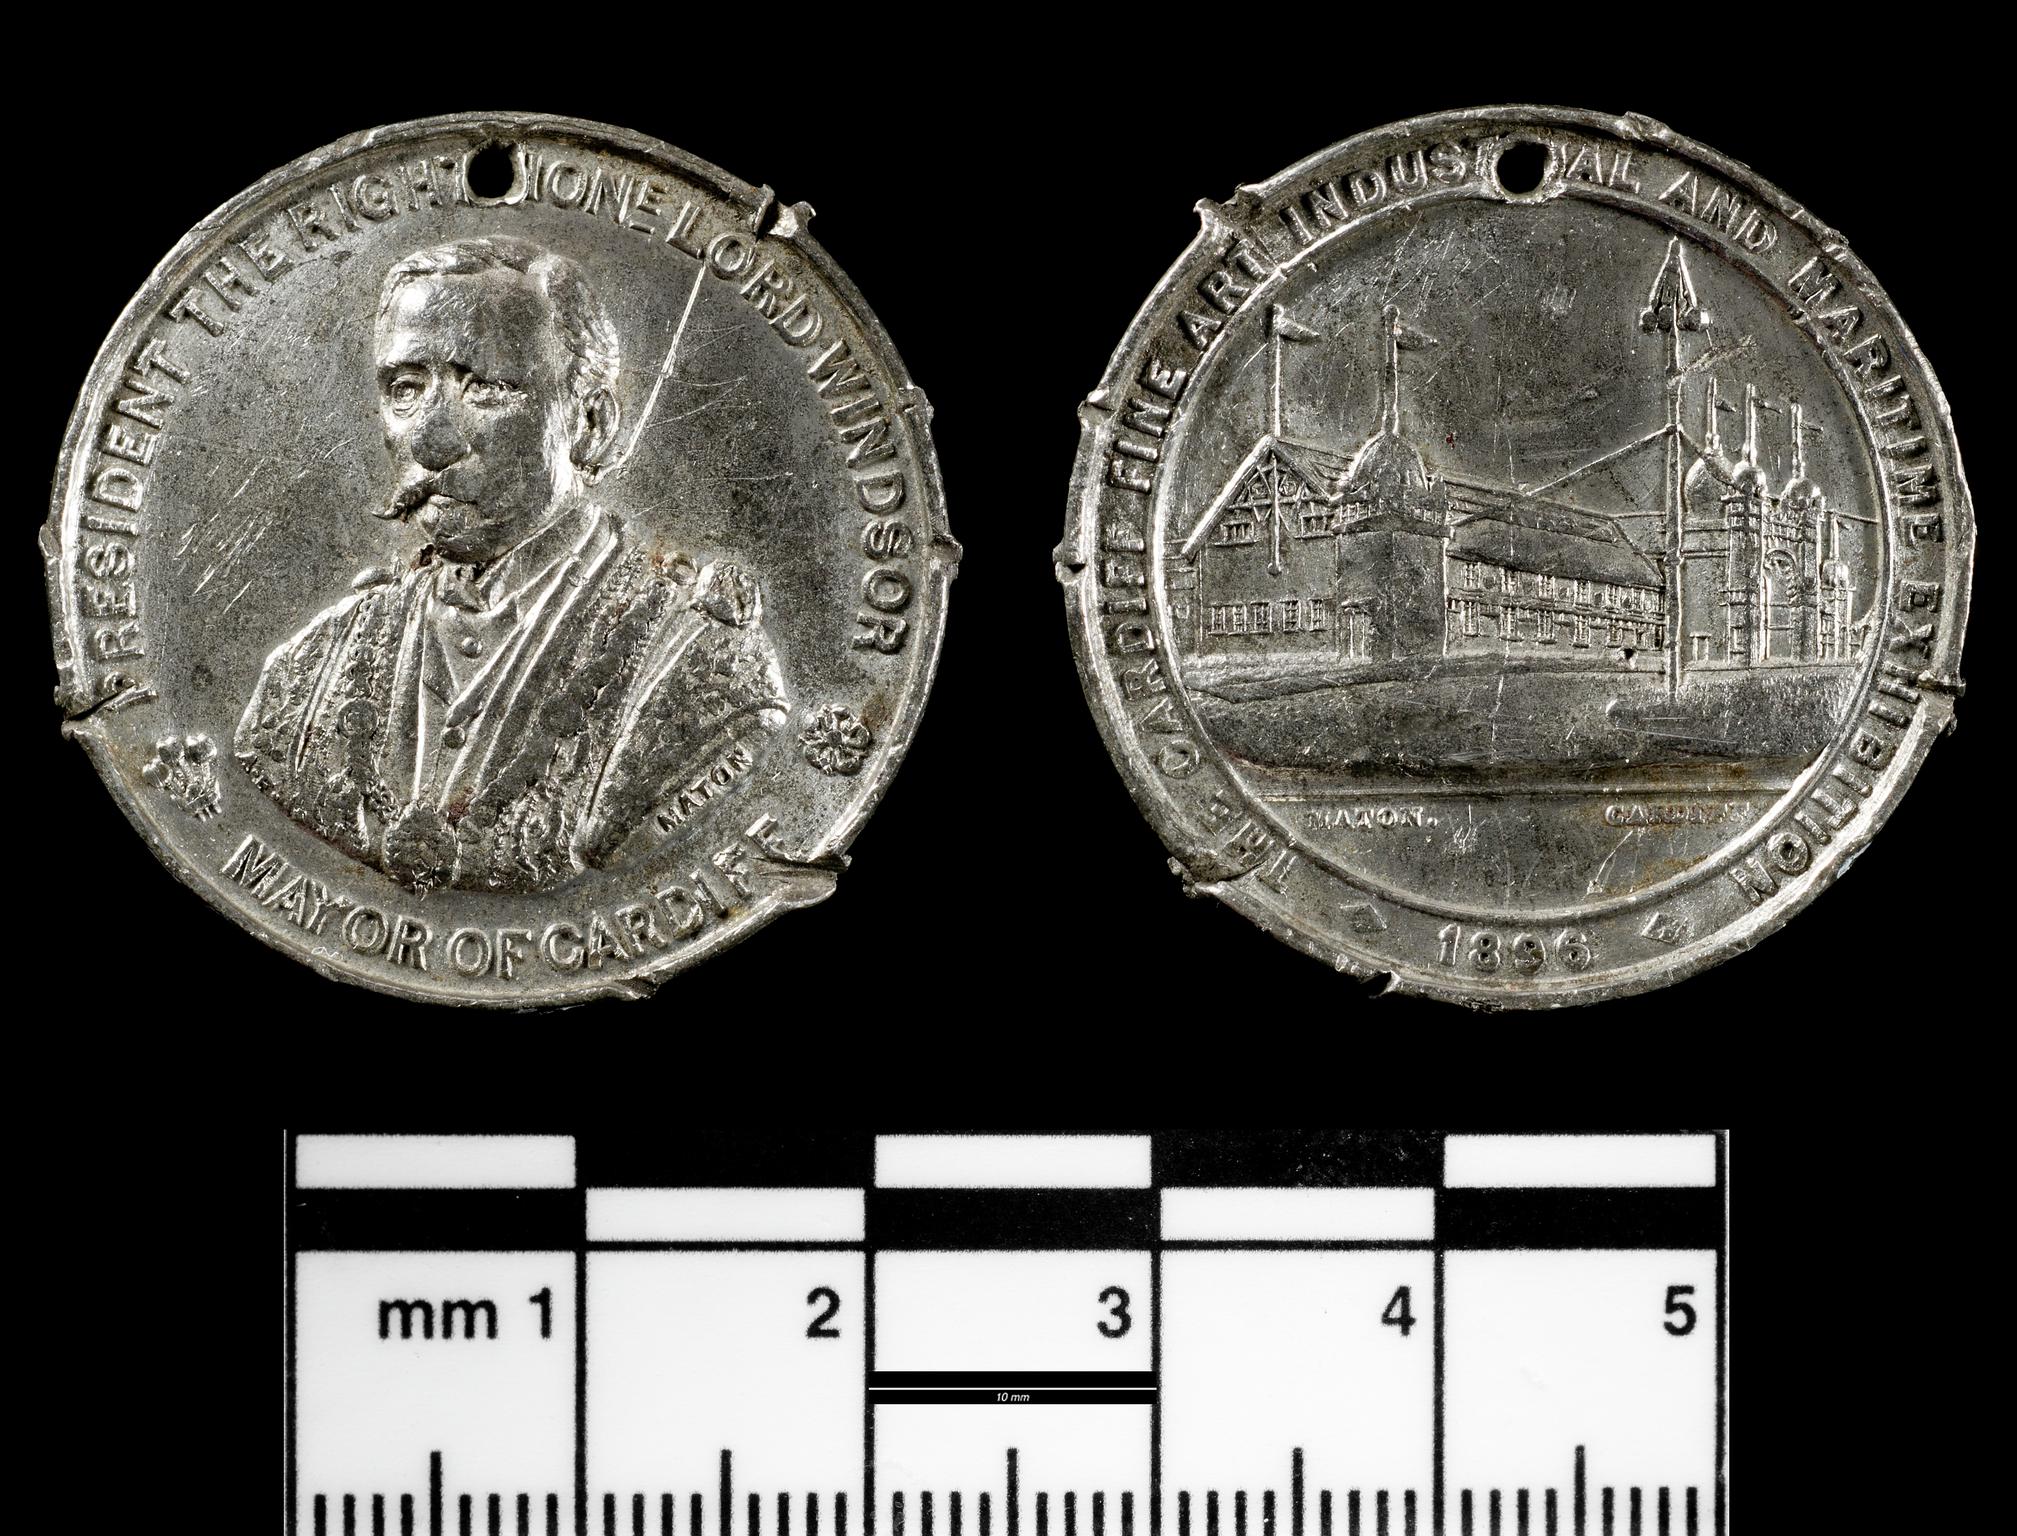 Cardiff Exhibition, 1896, medal